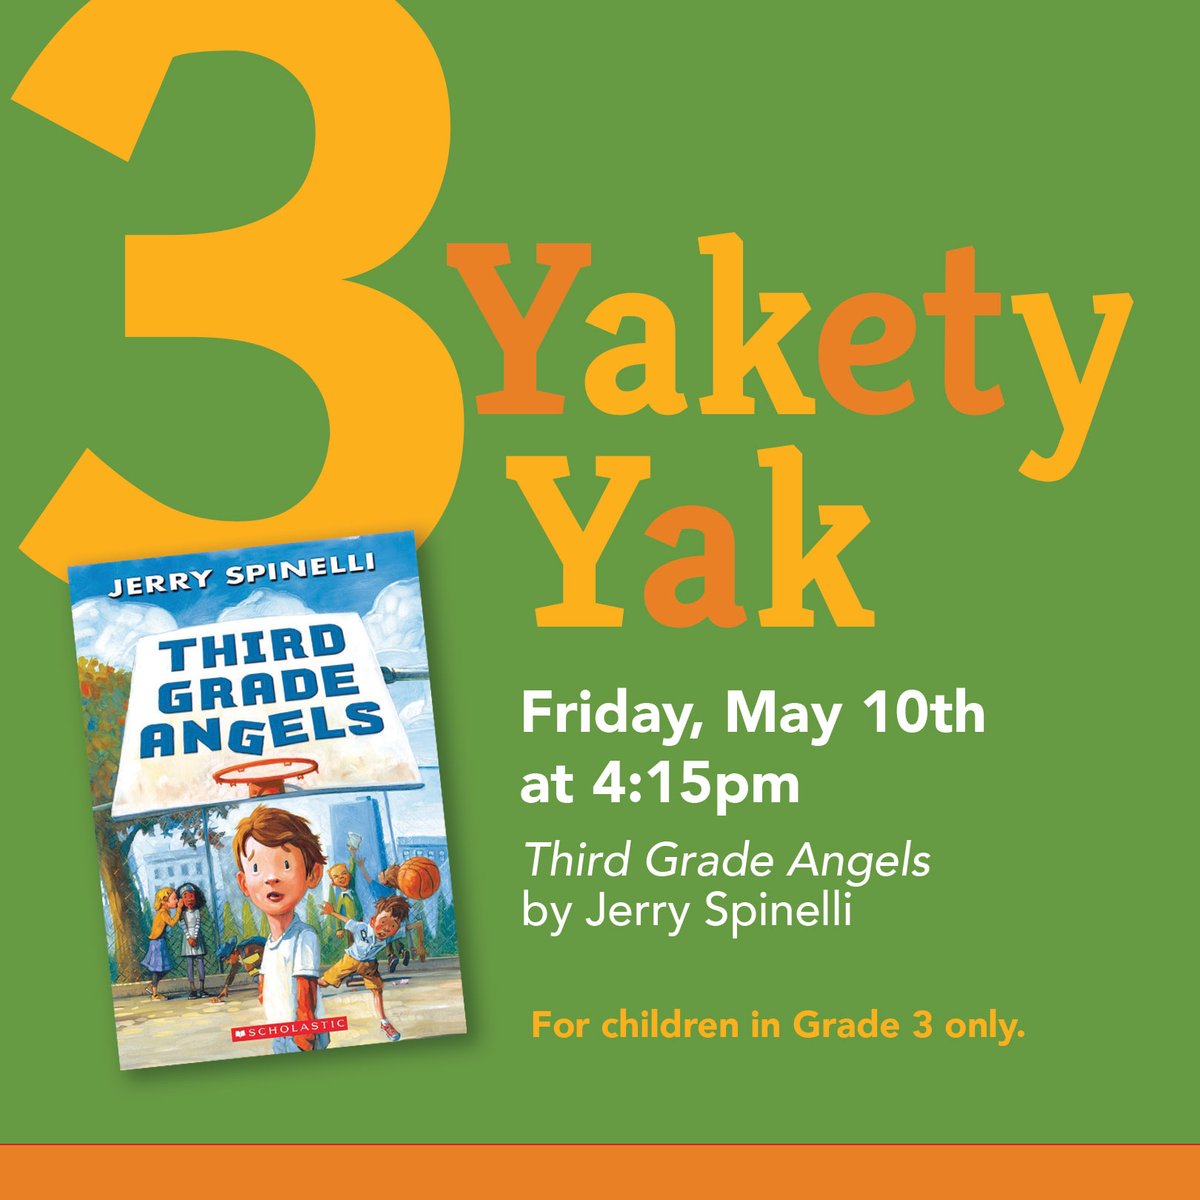 Visit our website to register. Please email tjersey@henhudfreelibrary.org upon registering for your free copy of the book! 

#yaketyyak #thirdgradeangels #jerryspinelli #reading #hhﬂ #librariesrock